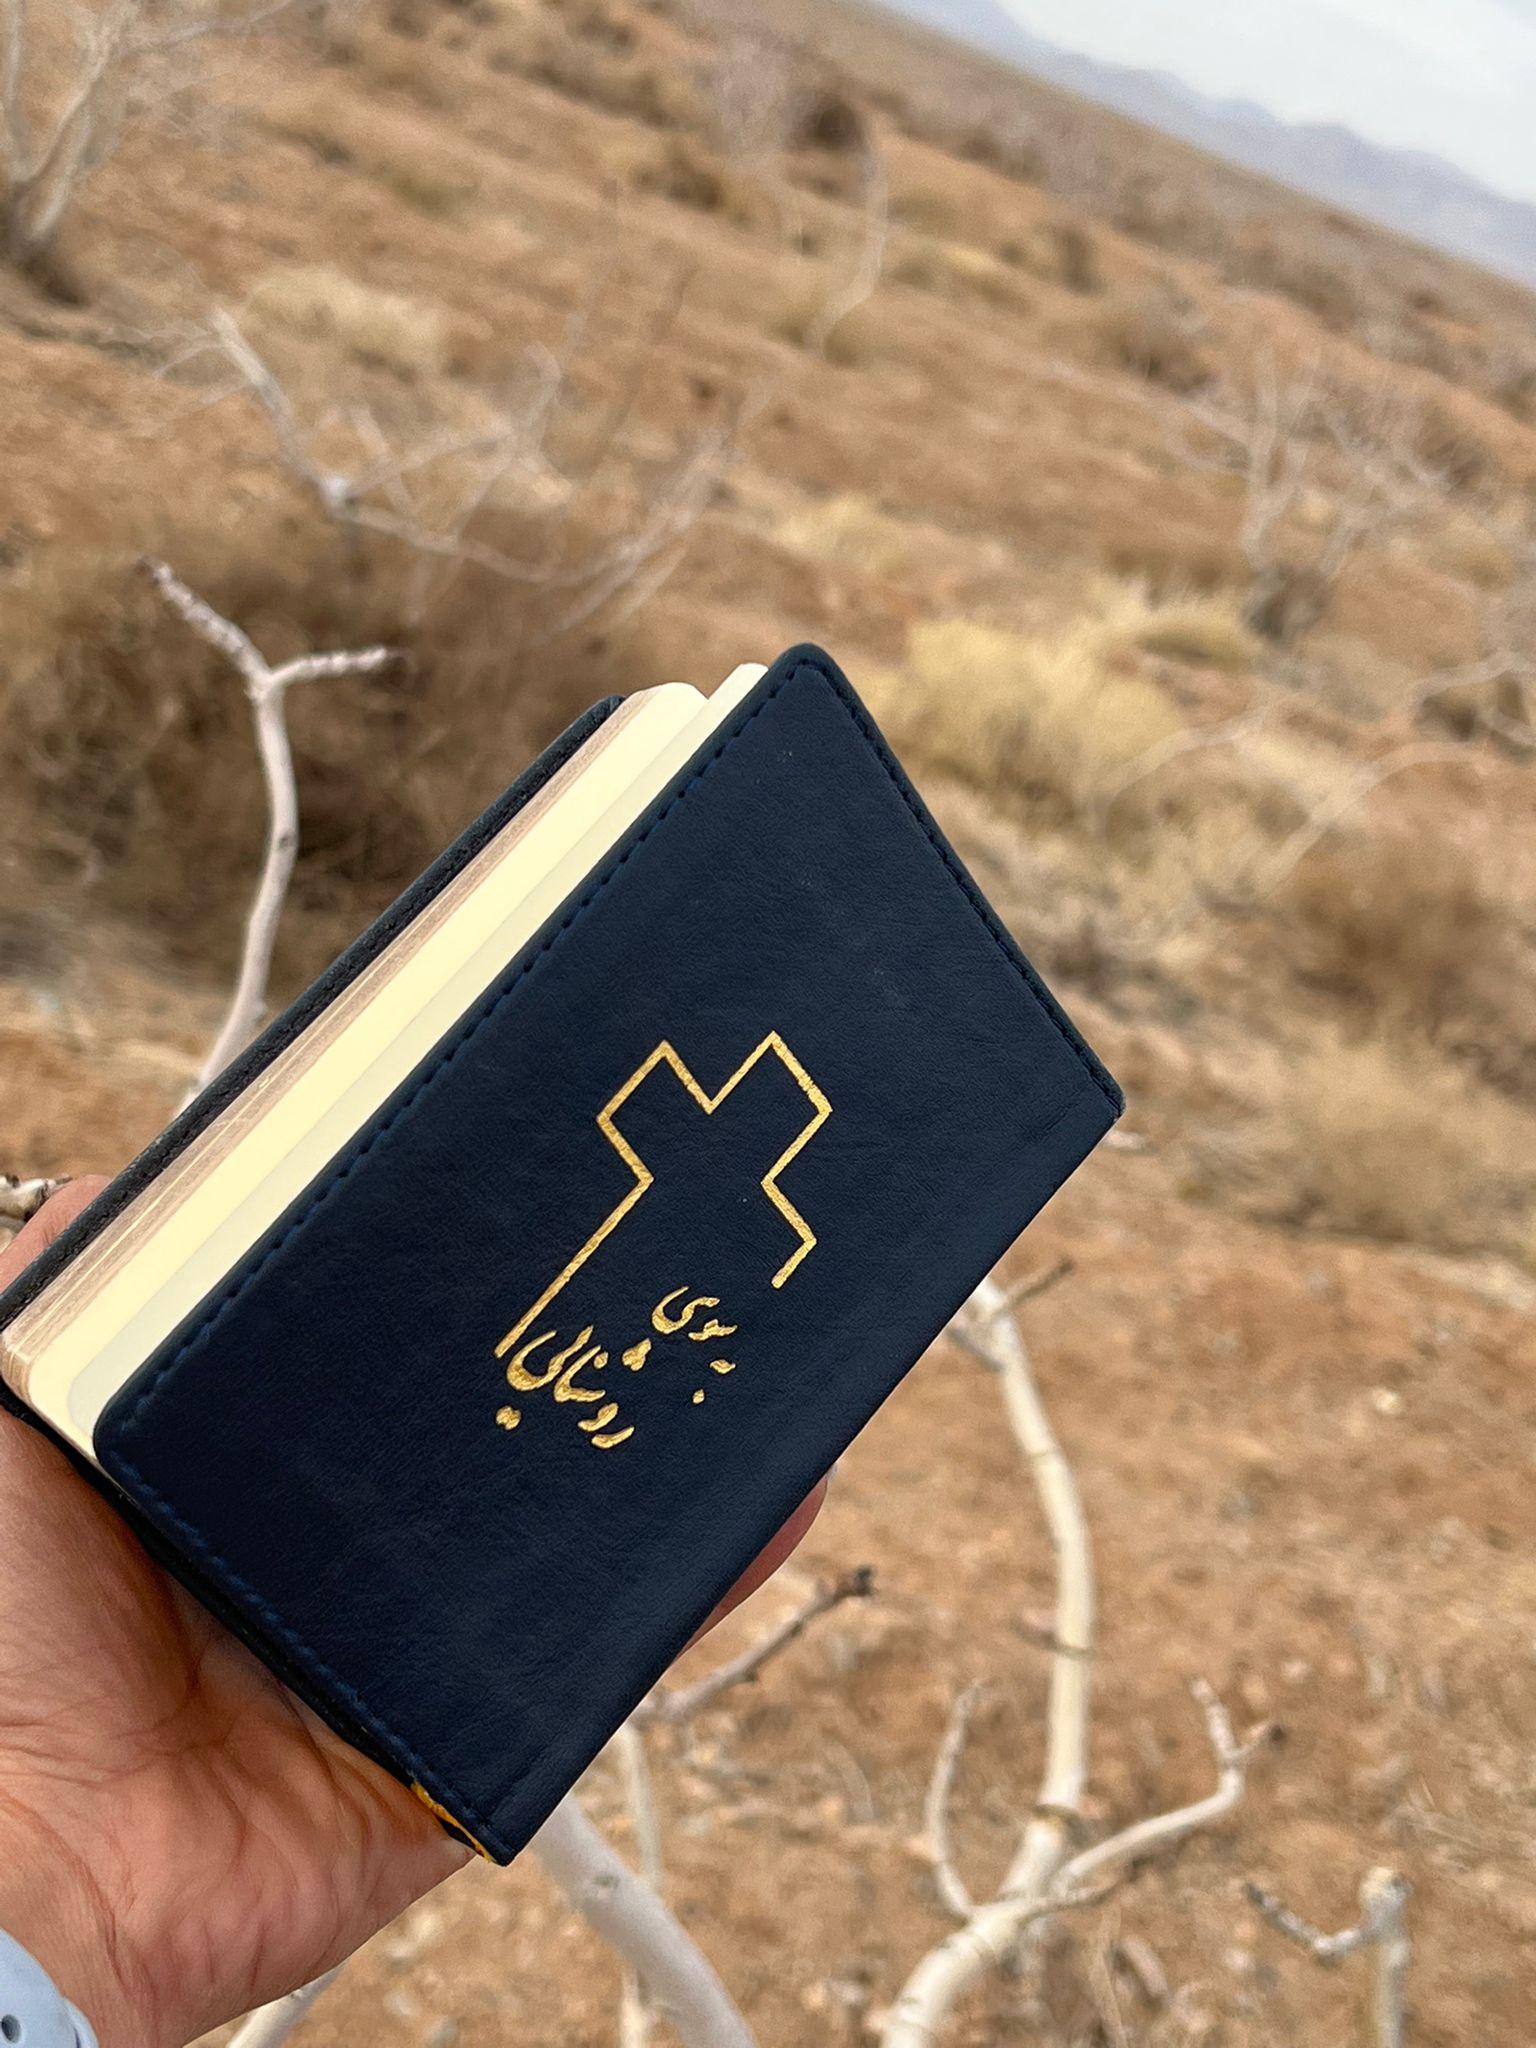 IRAN | APR. 6, 2022 — Bible Distributor Protected by Government Official